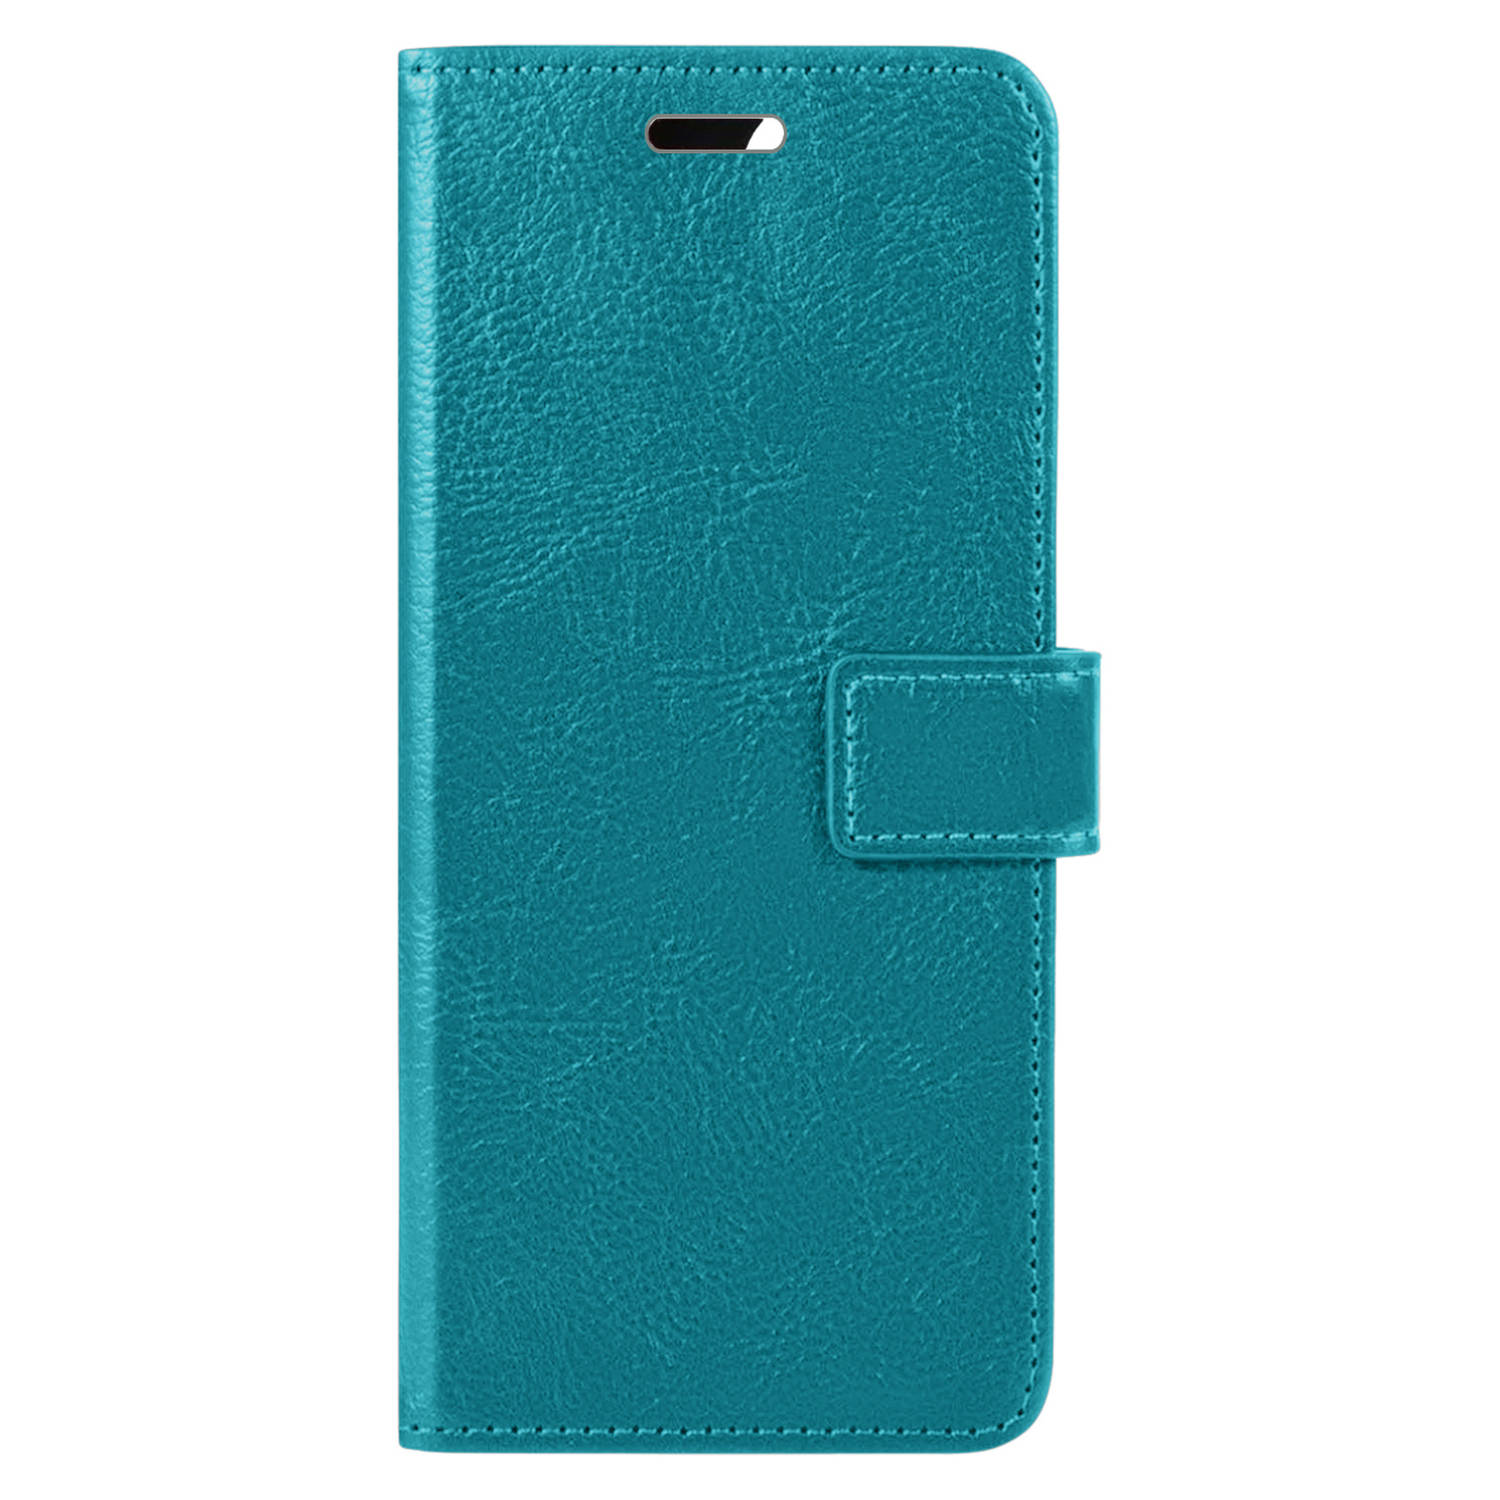 Samsung Galaxy A34 Hoesje Bookcase Hoes Flip Case Book Cover - Samsung A34 Hoes Book Case Hoesje - Turquoise